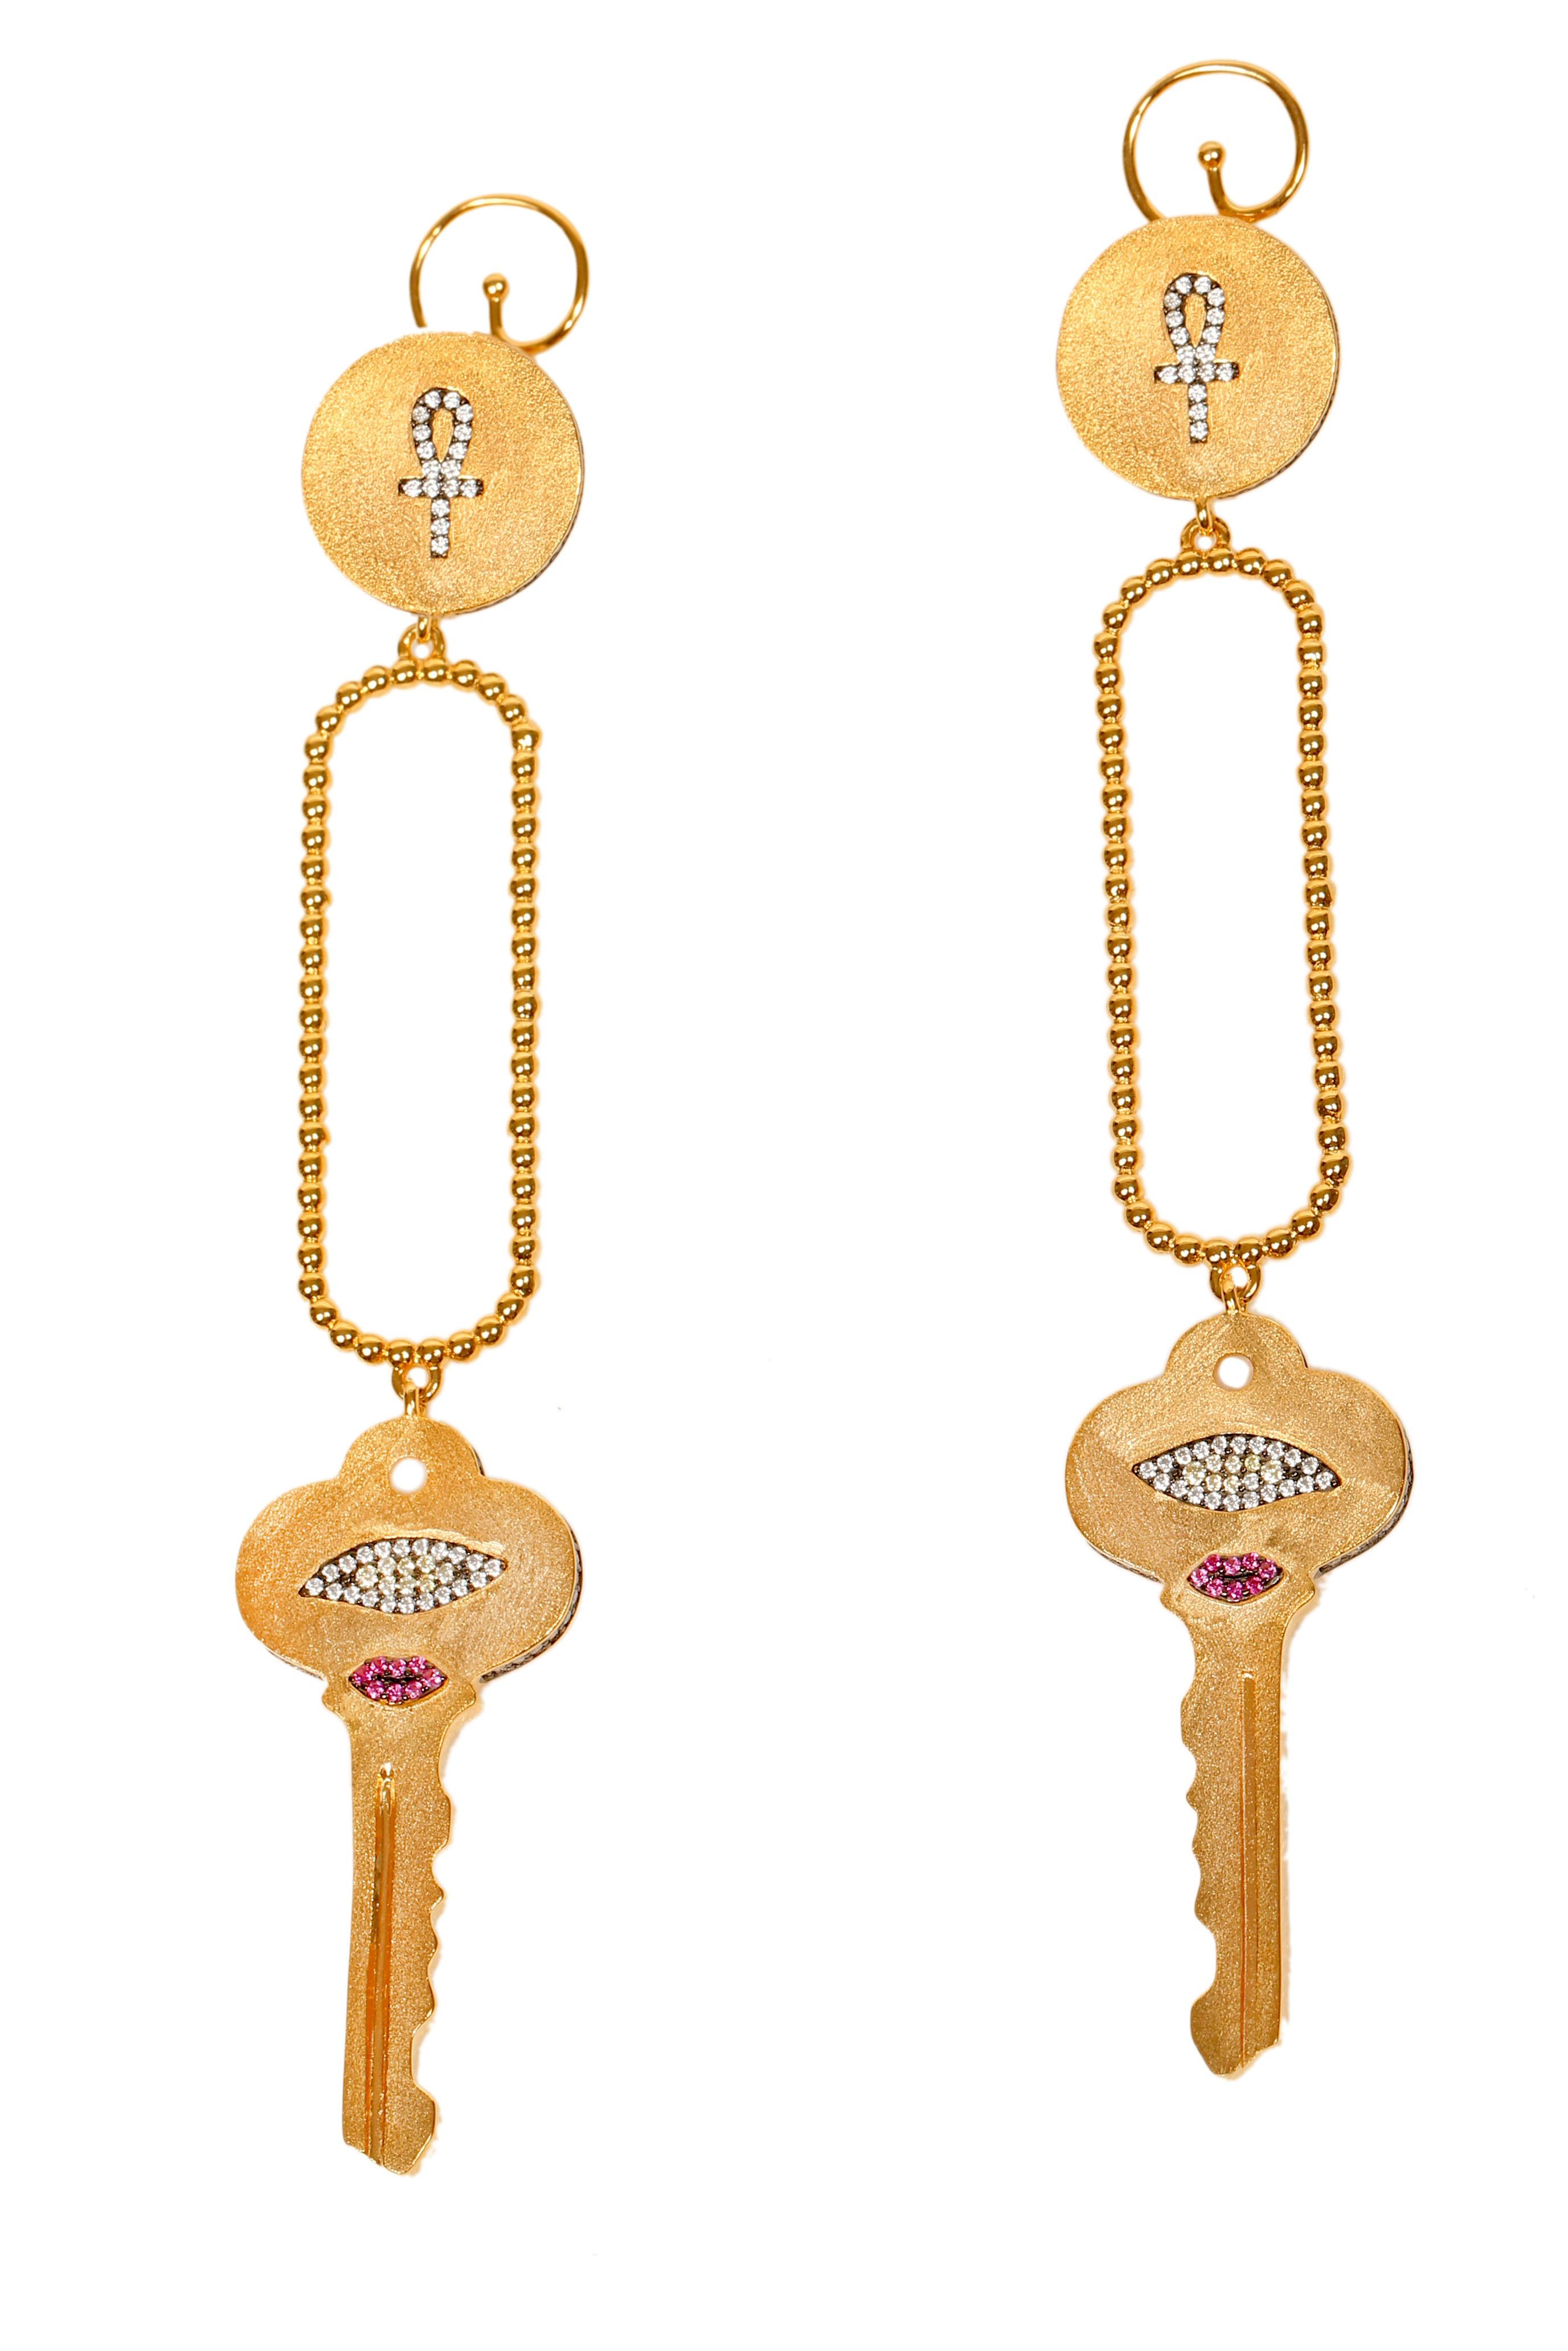 Ammanii Key Earrings with Ankh Amulet in Vermeil Gold